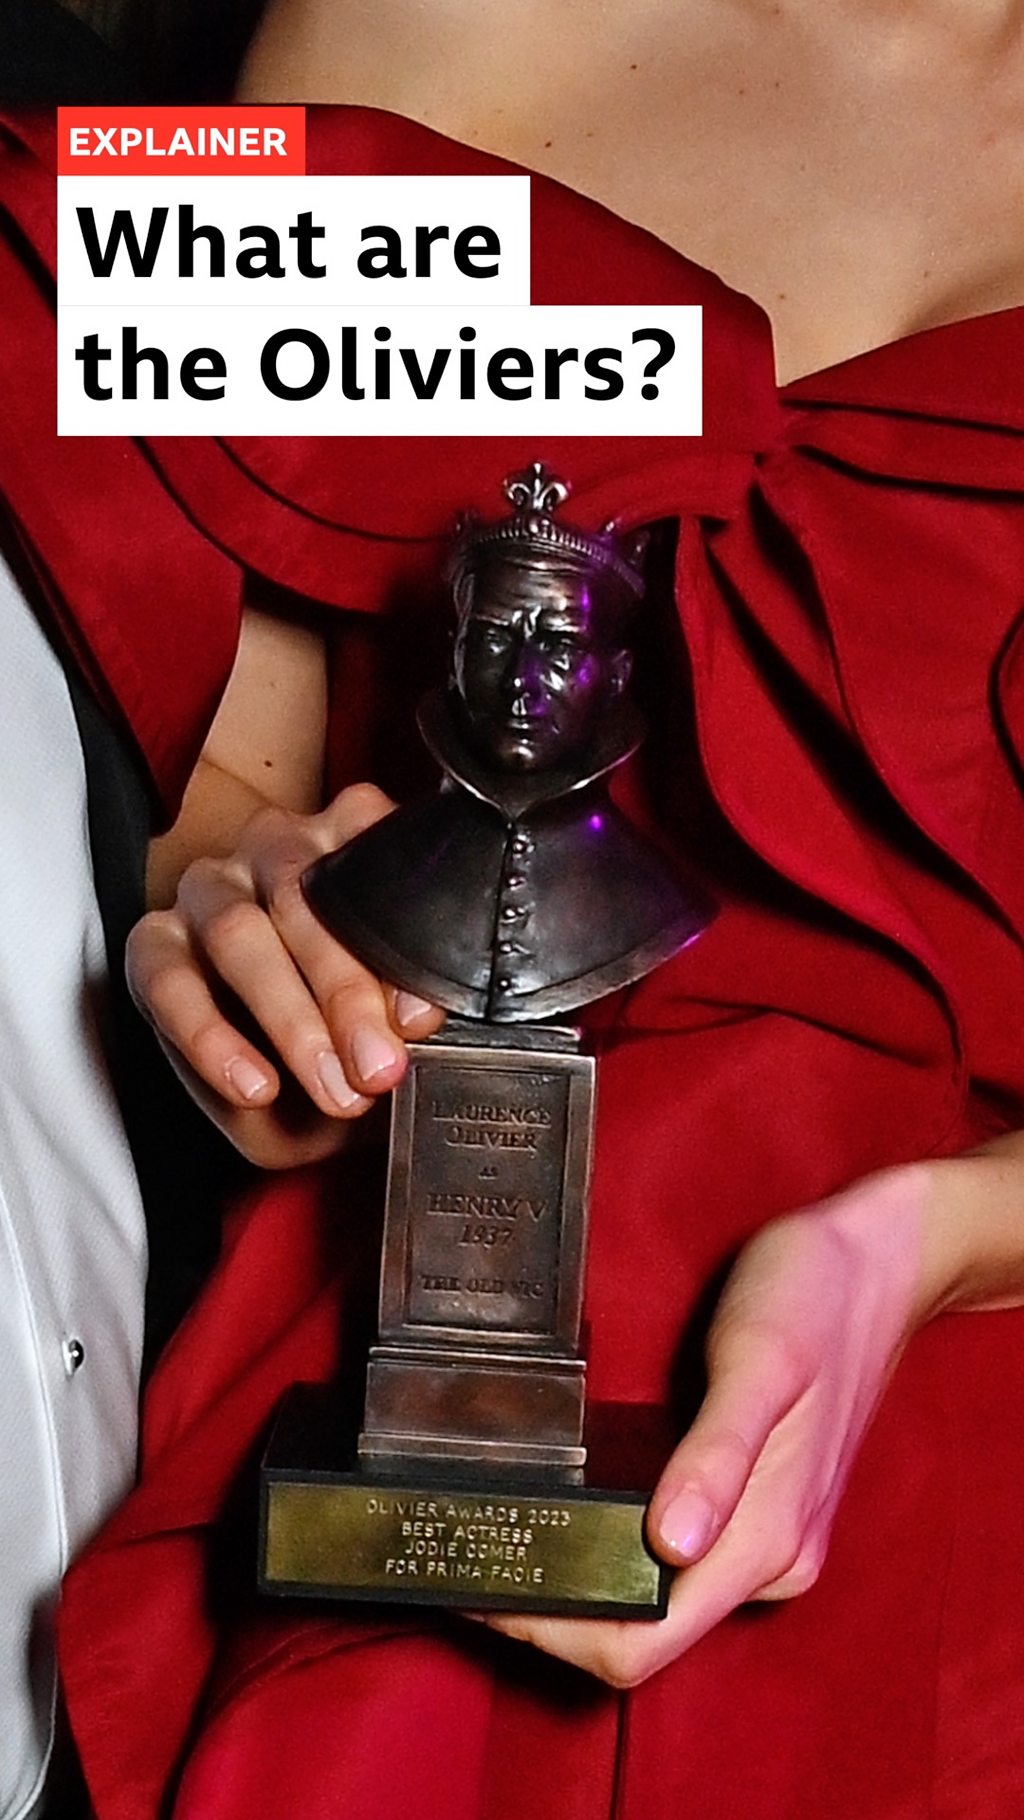 An Olivier Award trophy held by two hands in front of a red dress